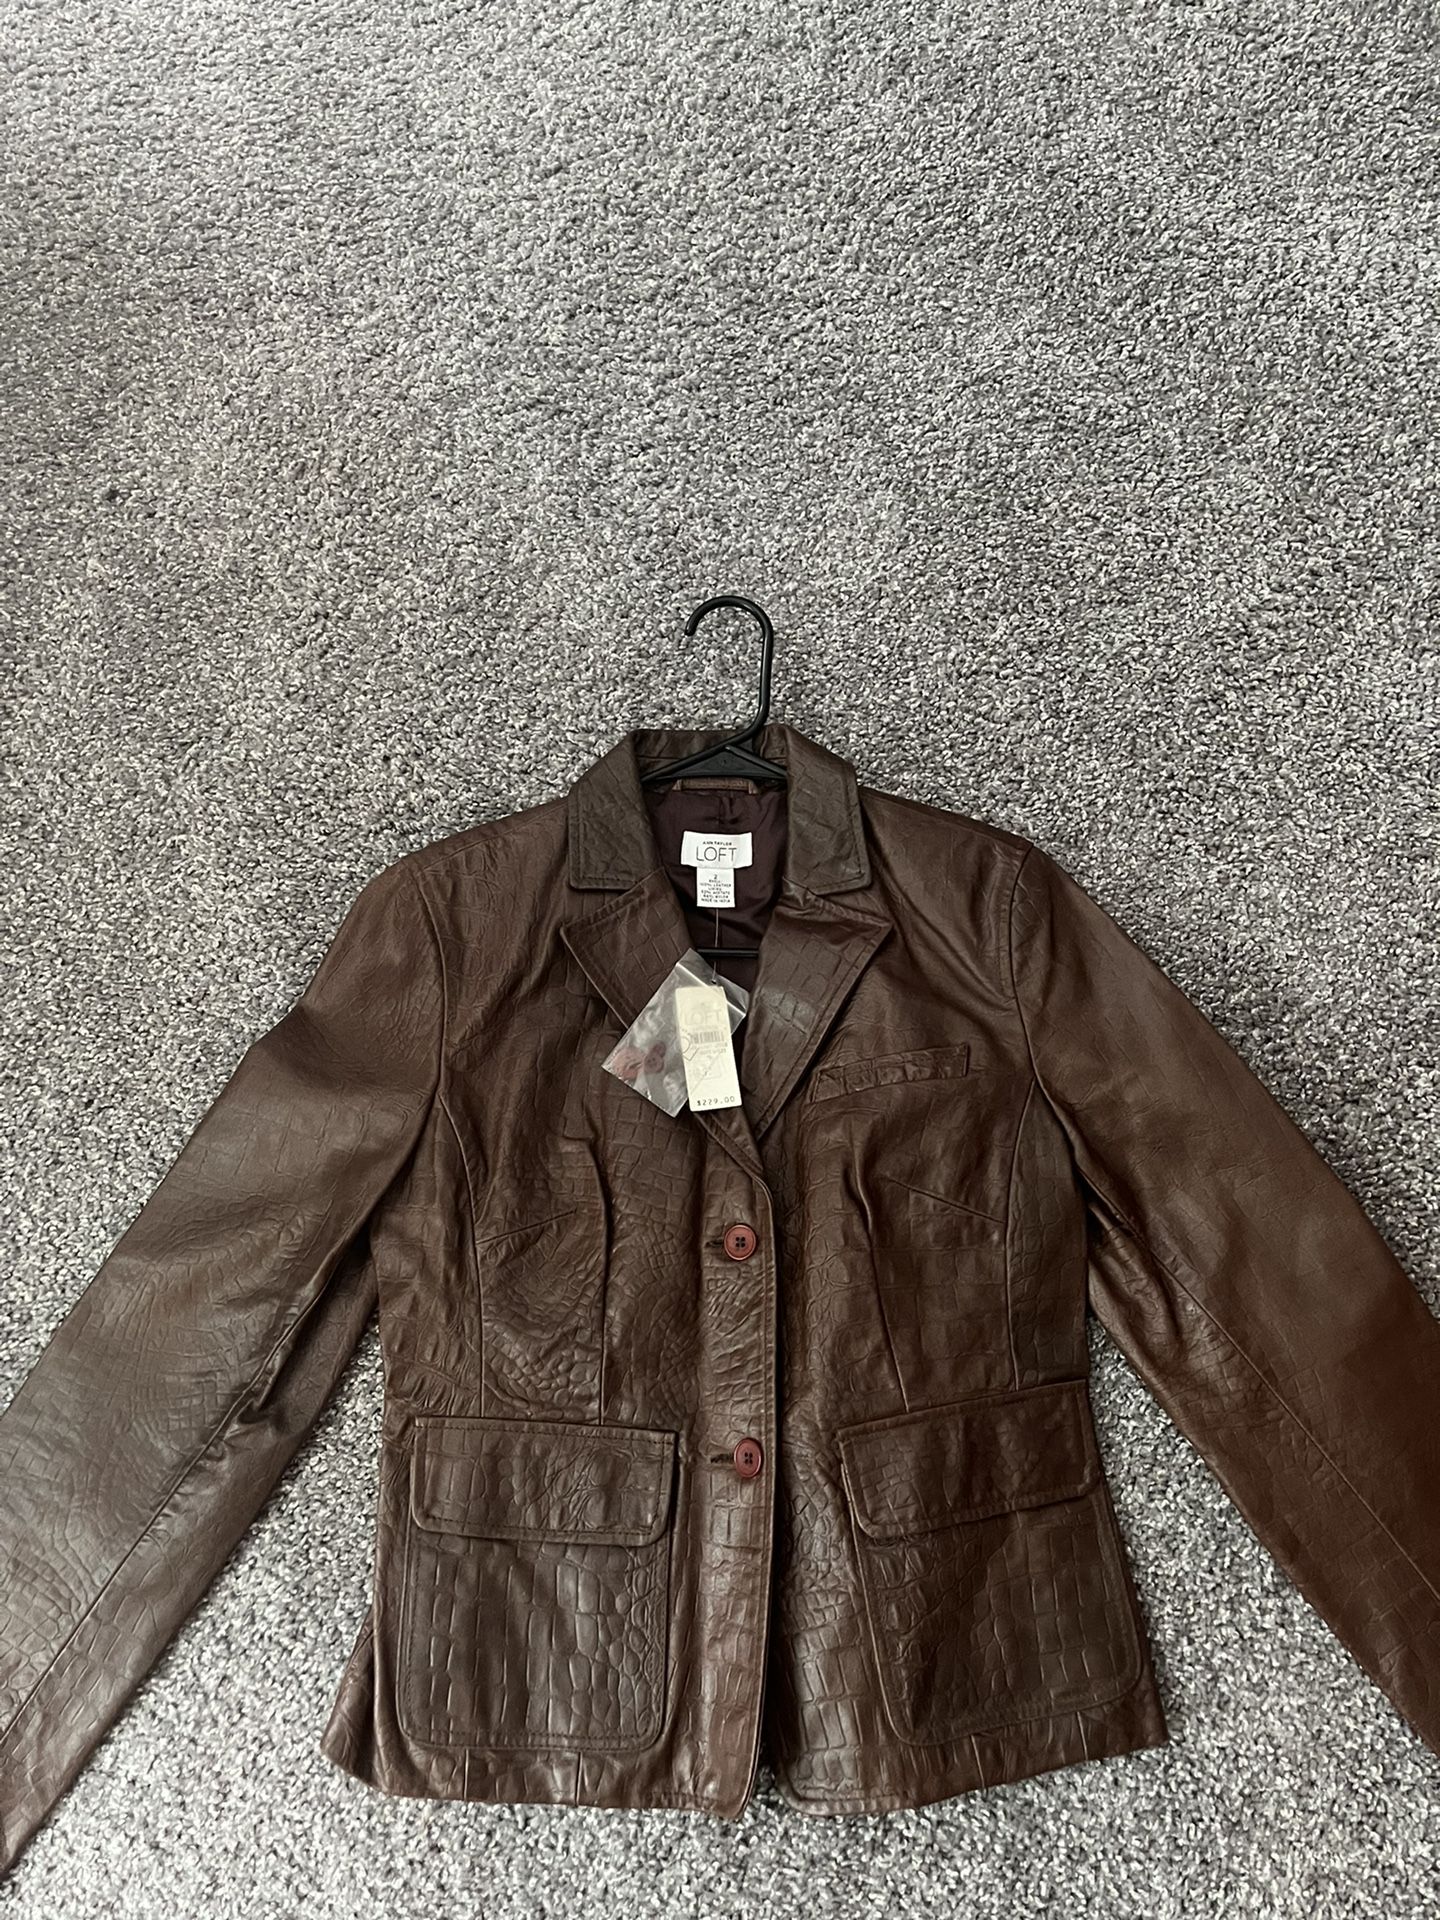 100% Aunthentic Brown Leather Jacket, 35% Off Retail! 